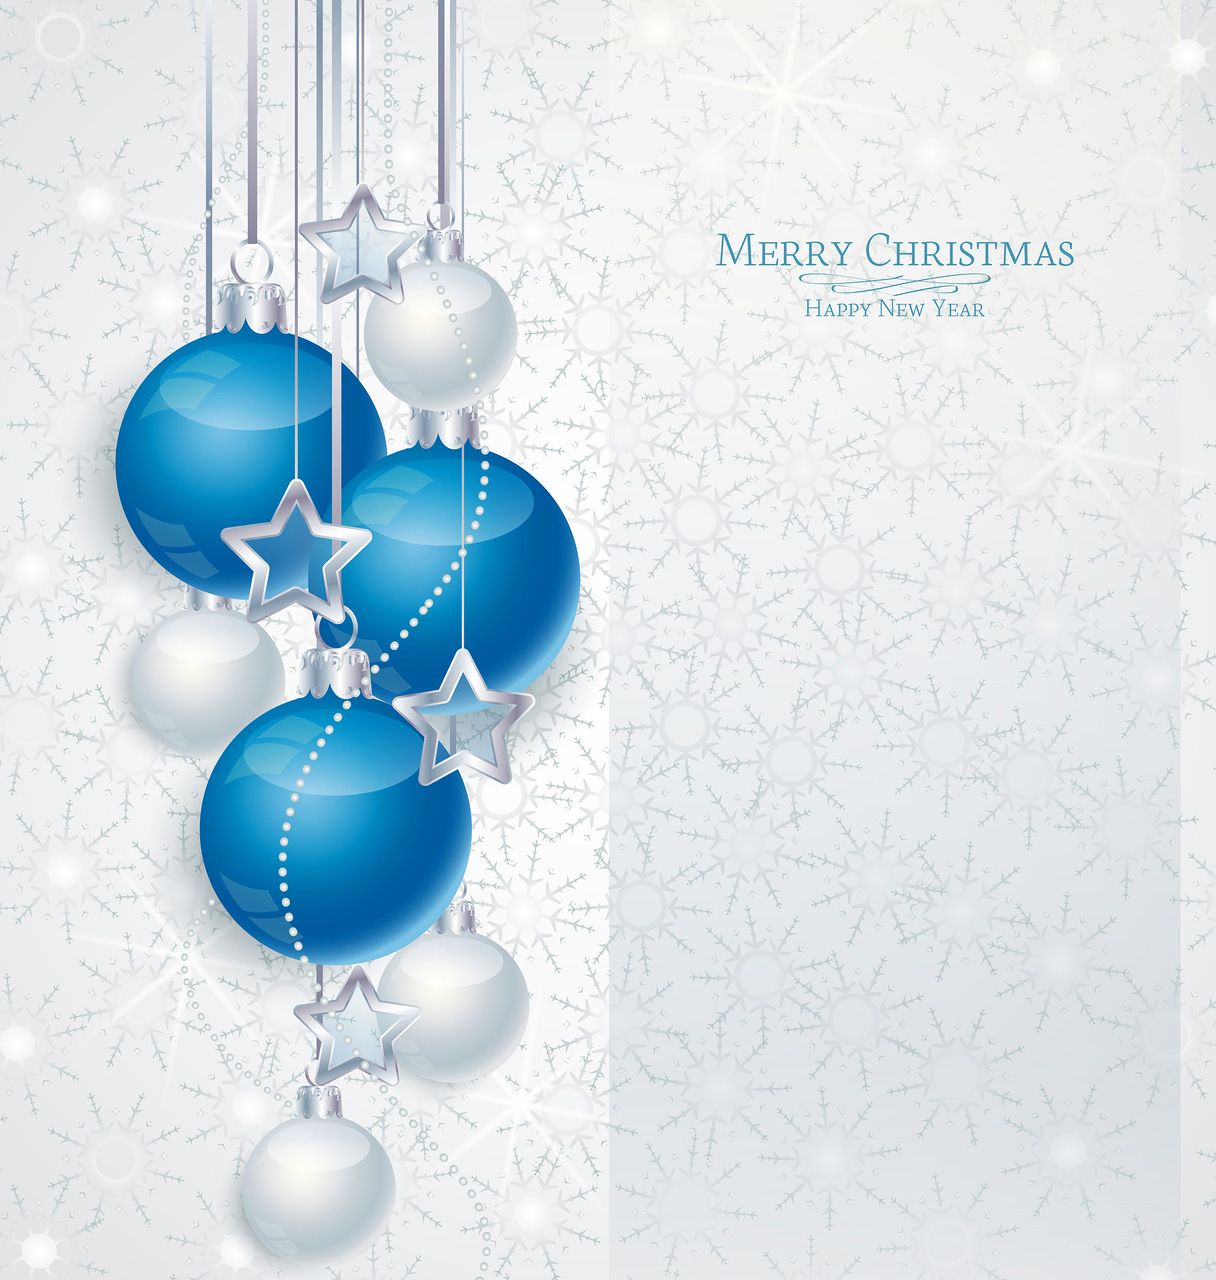 Free download White Christmas Background with Blue Ornaments Gallery [1216x1280] for your Desktop, Mobile & Tablet. Explore Blue Ornaments Wallpaper. Blue Ornaments Wallpaper, Christmas Ornaments Wallpaper, Christmas Ornaments Wallpaper for Desktop